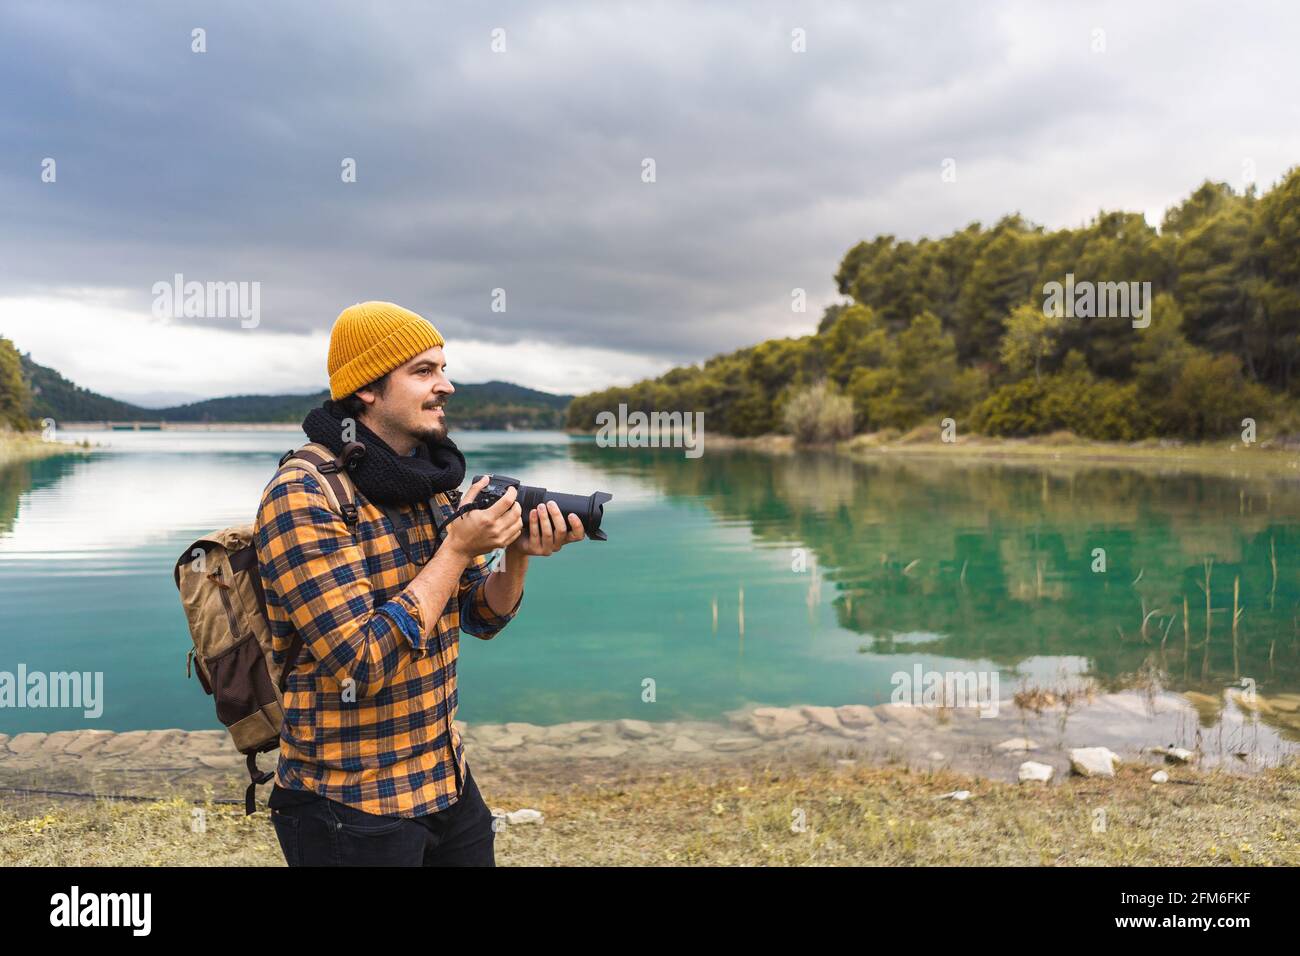 Smiling tourist taking pictures with his camera in nature Stock Photo